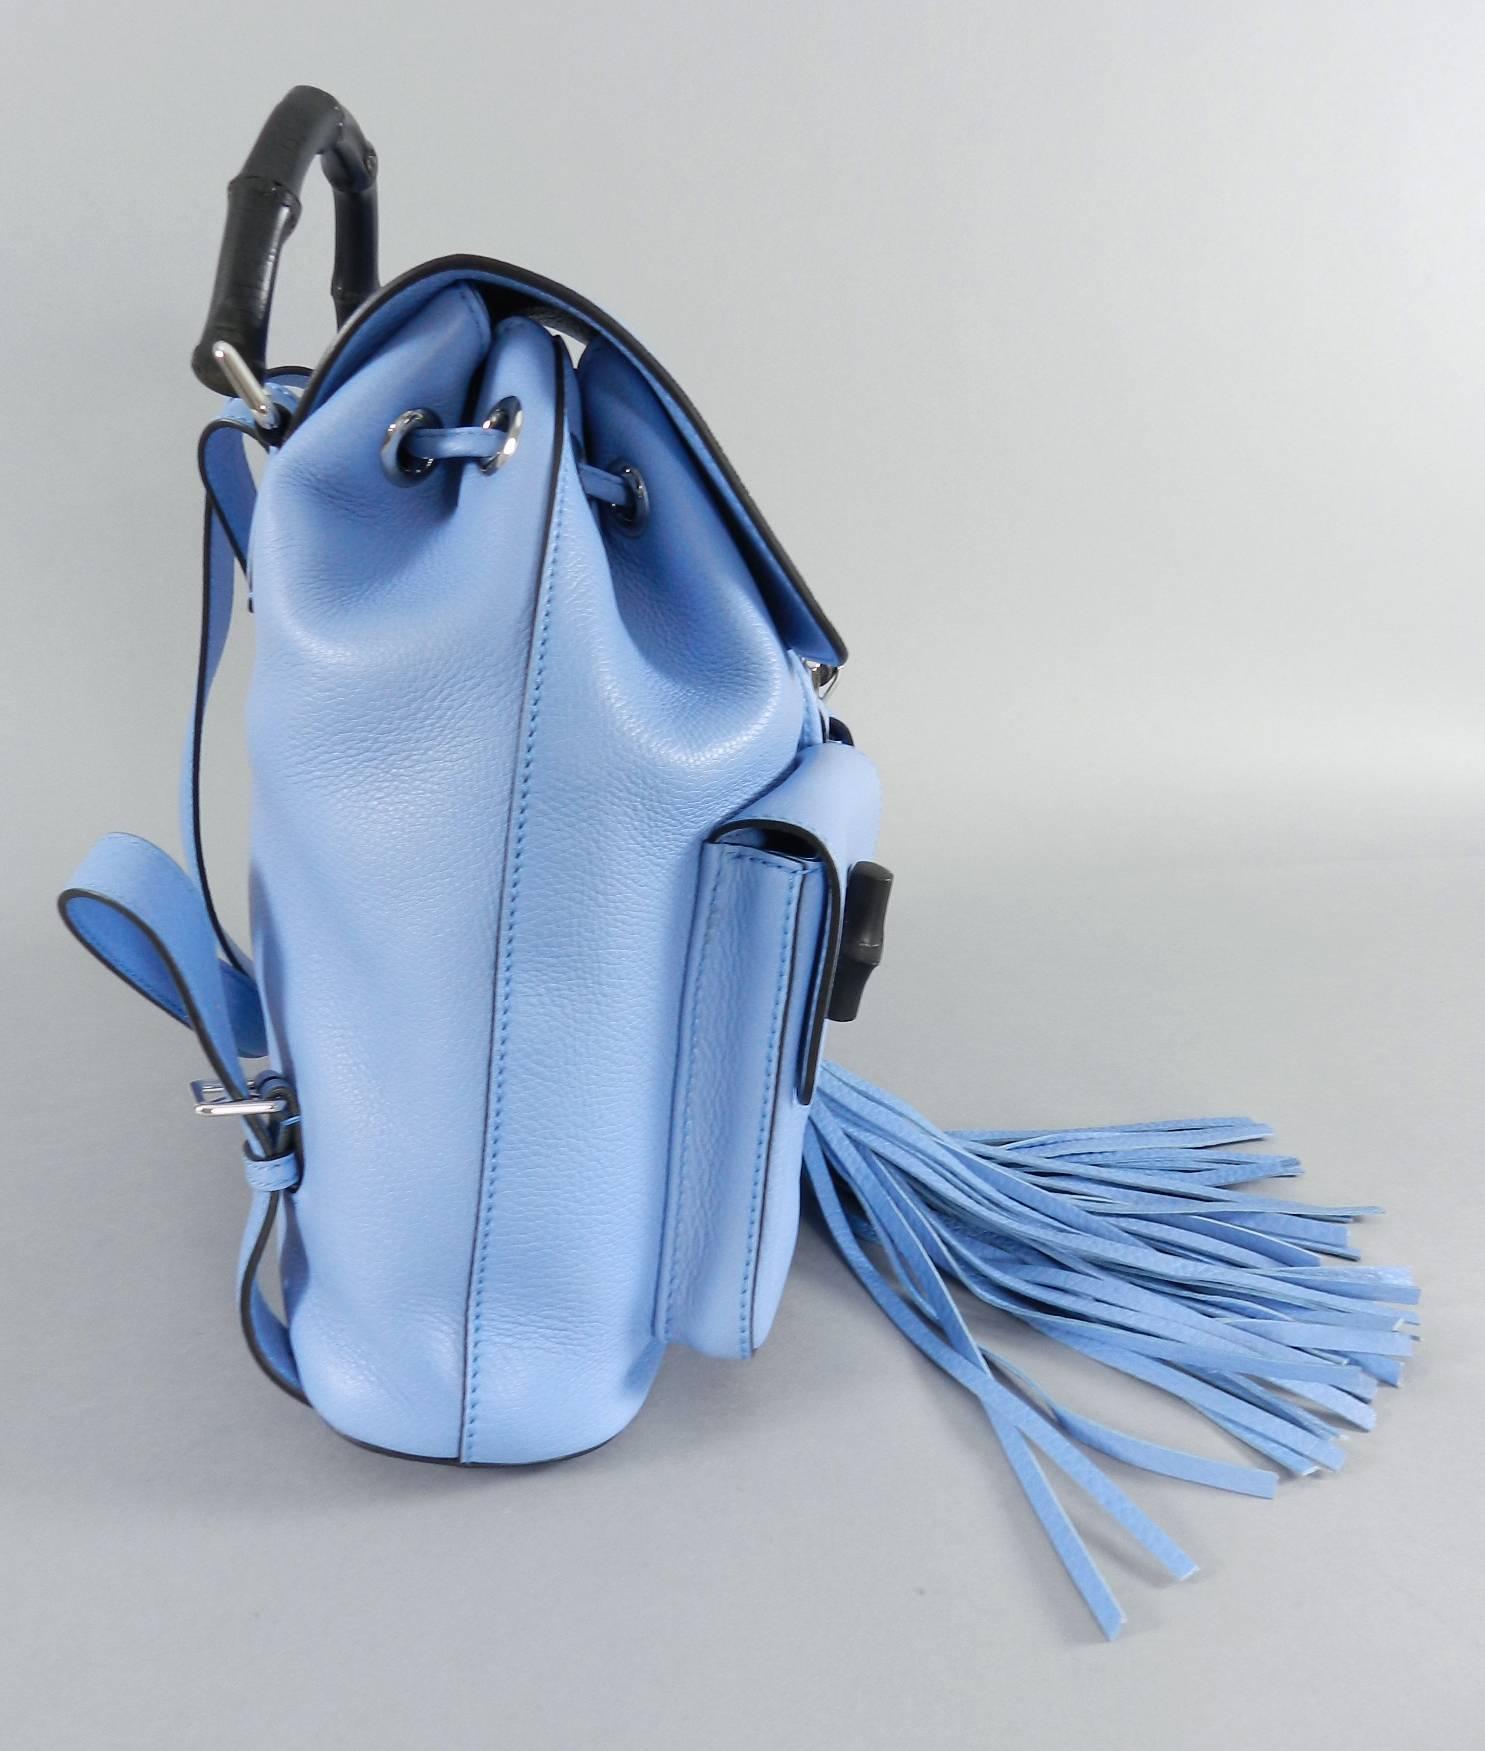 Women's Gucci Blue Leather Backpack with Bamboo Handle and Tassels